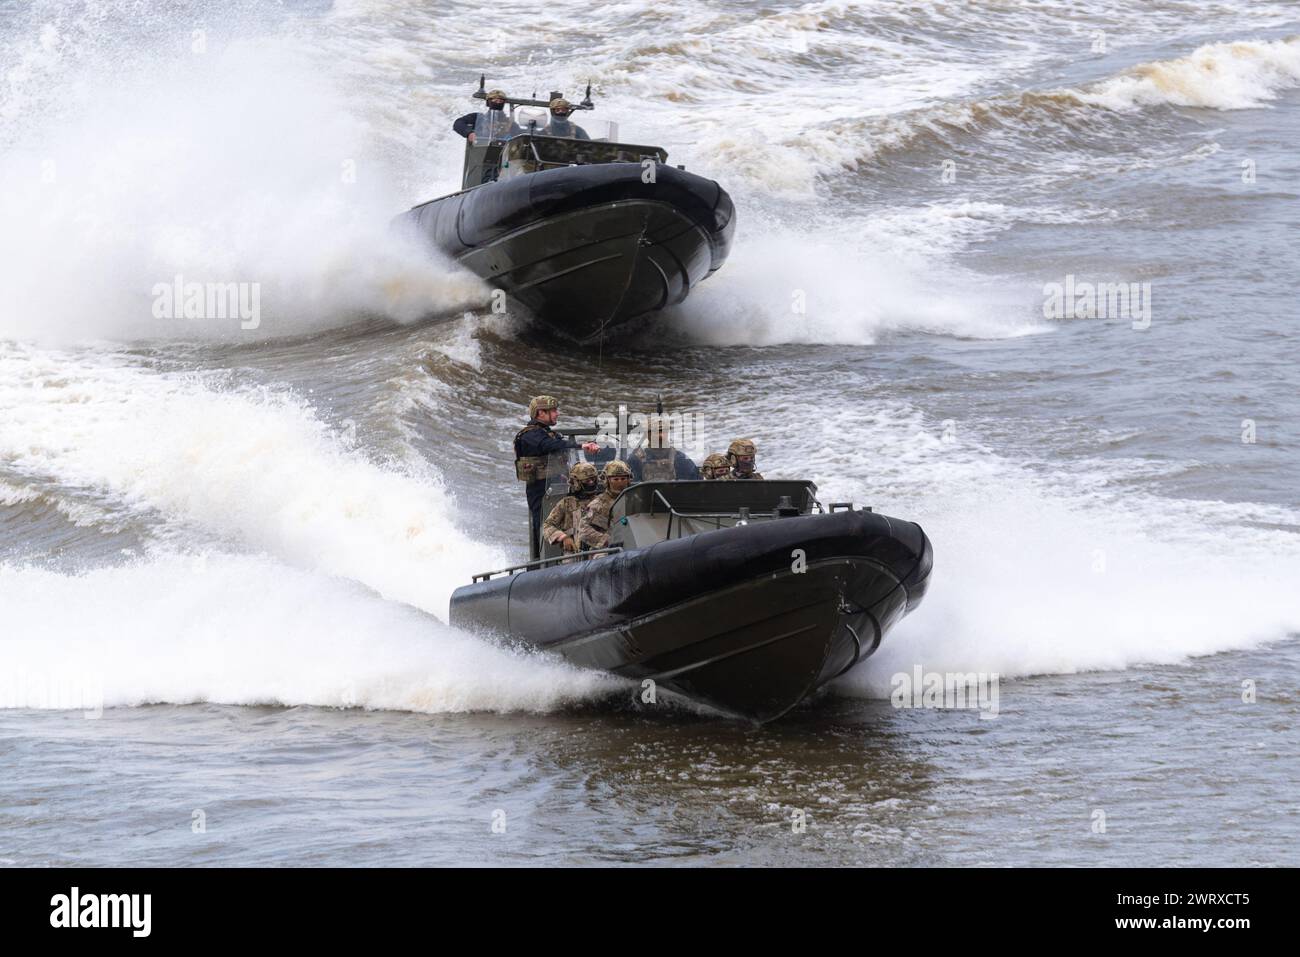 Royal Marines Commandos taking part in Constable's Dues traditional event by the Tower of London, UK. Riding in Offshore Raiding Craft on River Thames Stock Photo